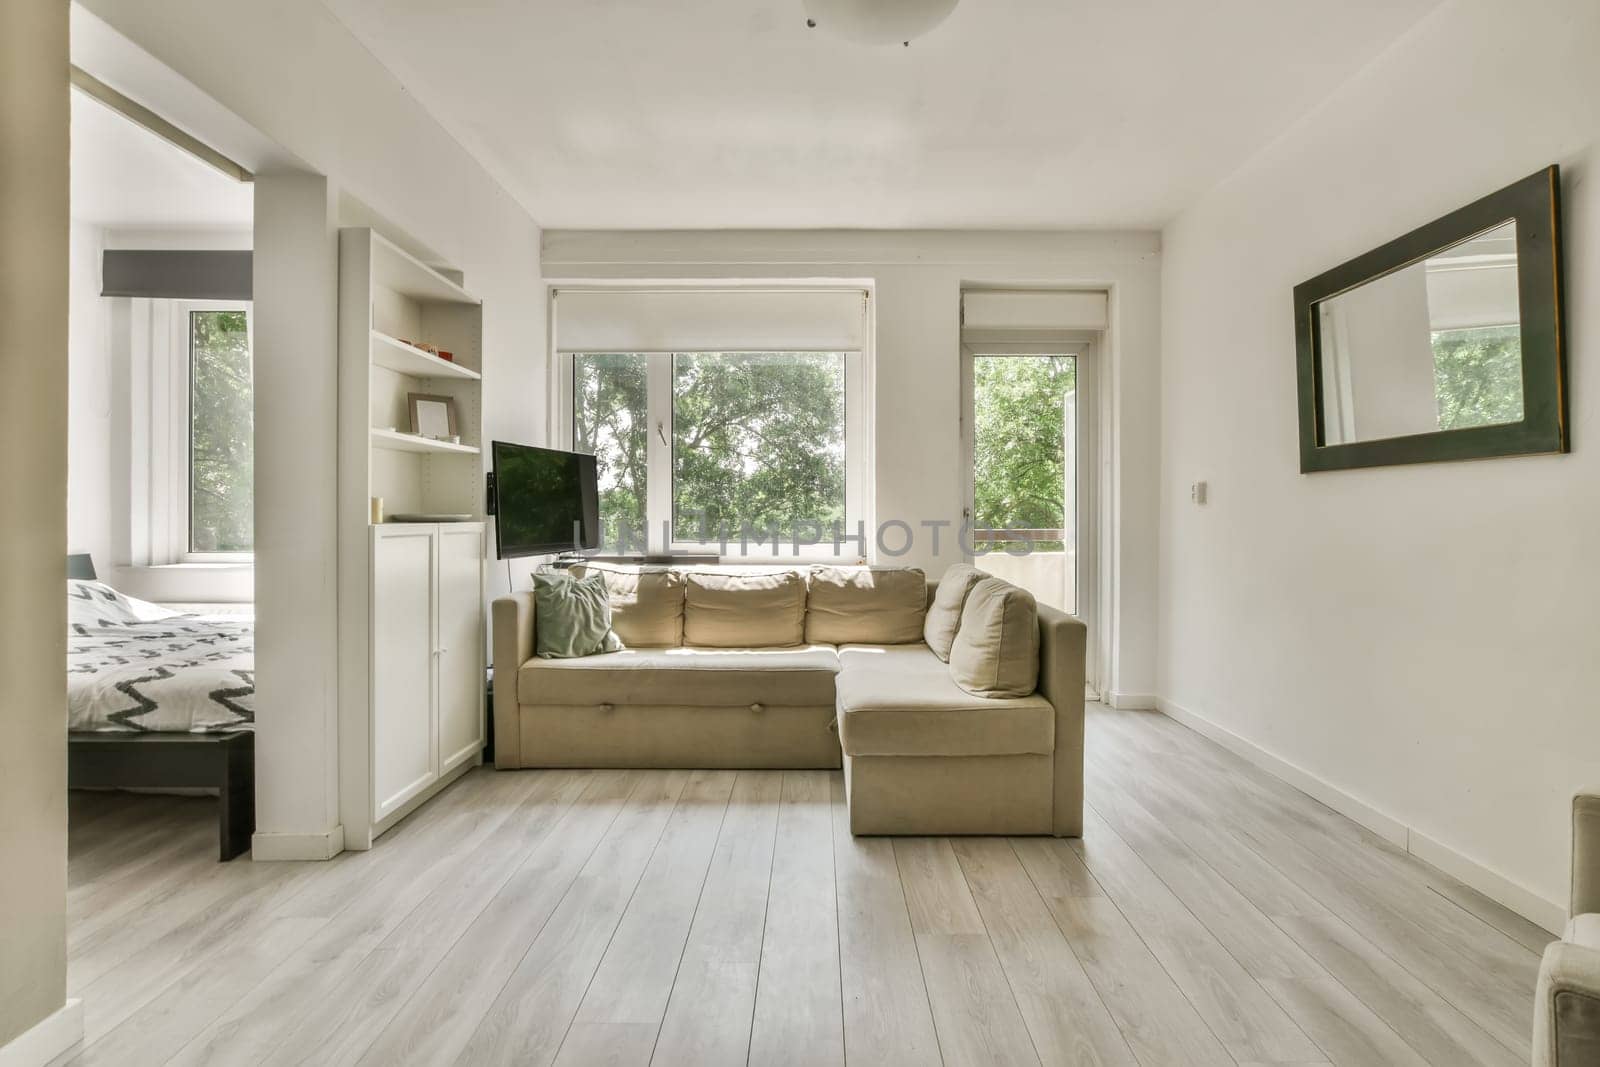 a living room with wood flooring and white walls in the background is a large window that looks out onto trees